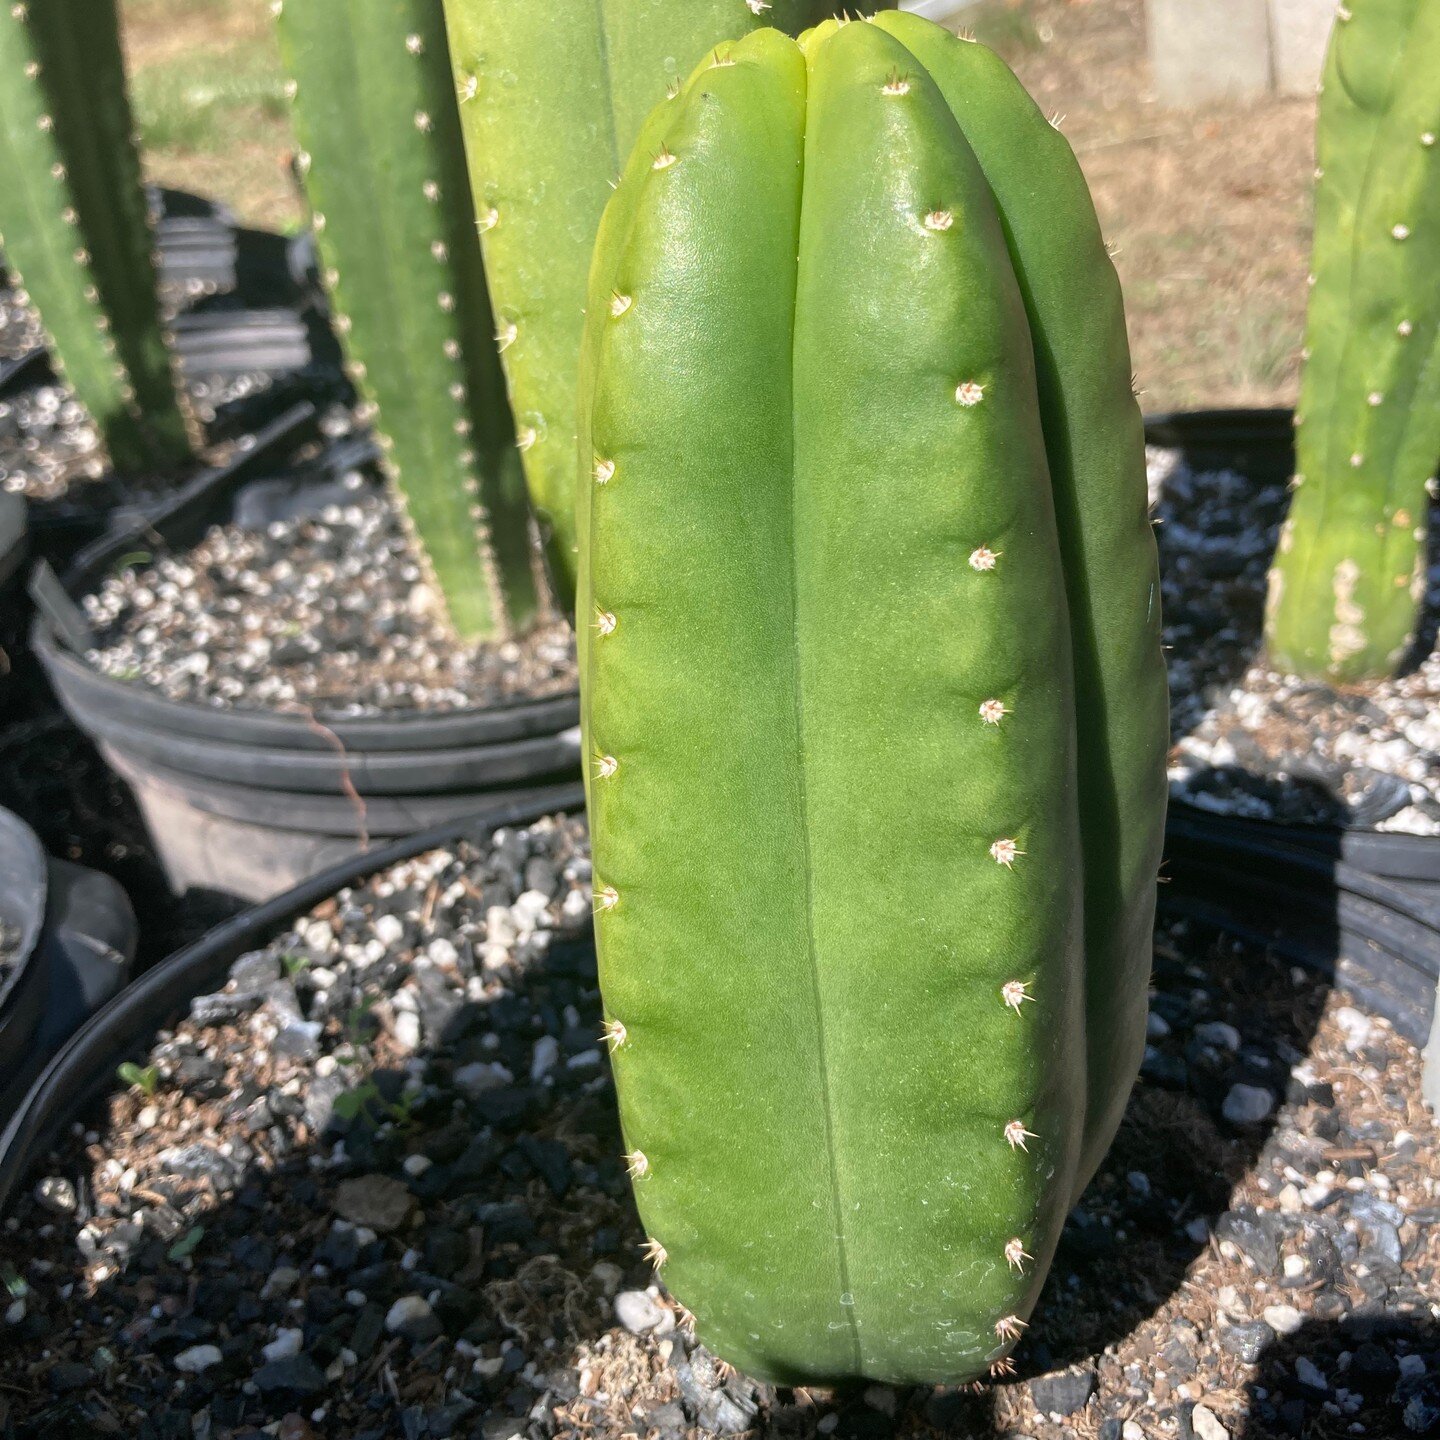 King Tubby is spayshul, which was apparent at only 2 inches tall. He stands out in the crowd. Chubby, shallow grooved, notchy, smooth goodness. Whos a chubby wittle cactush!? Yesh you are... Scop x Juul's Giant. First pup, from a 2020 seedling. Next 